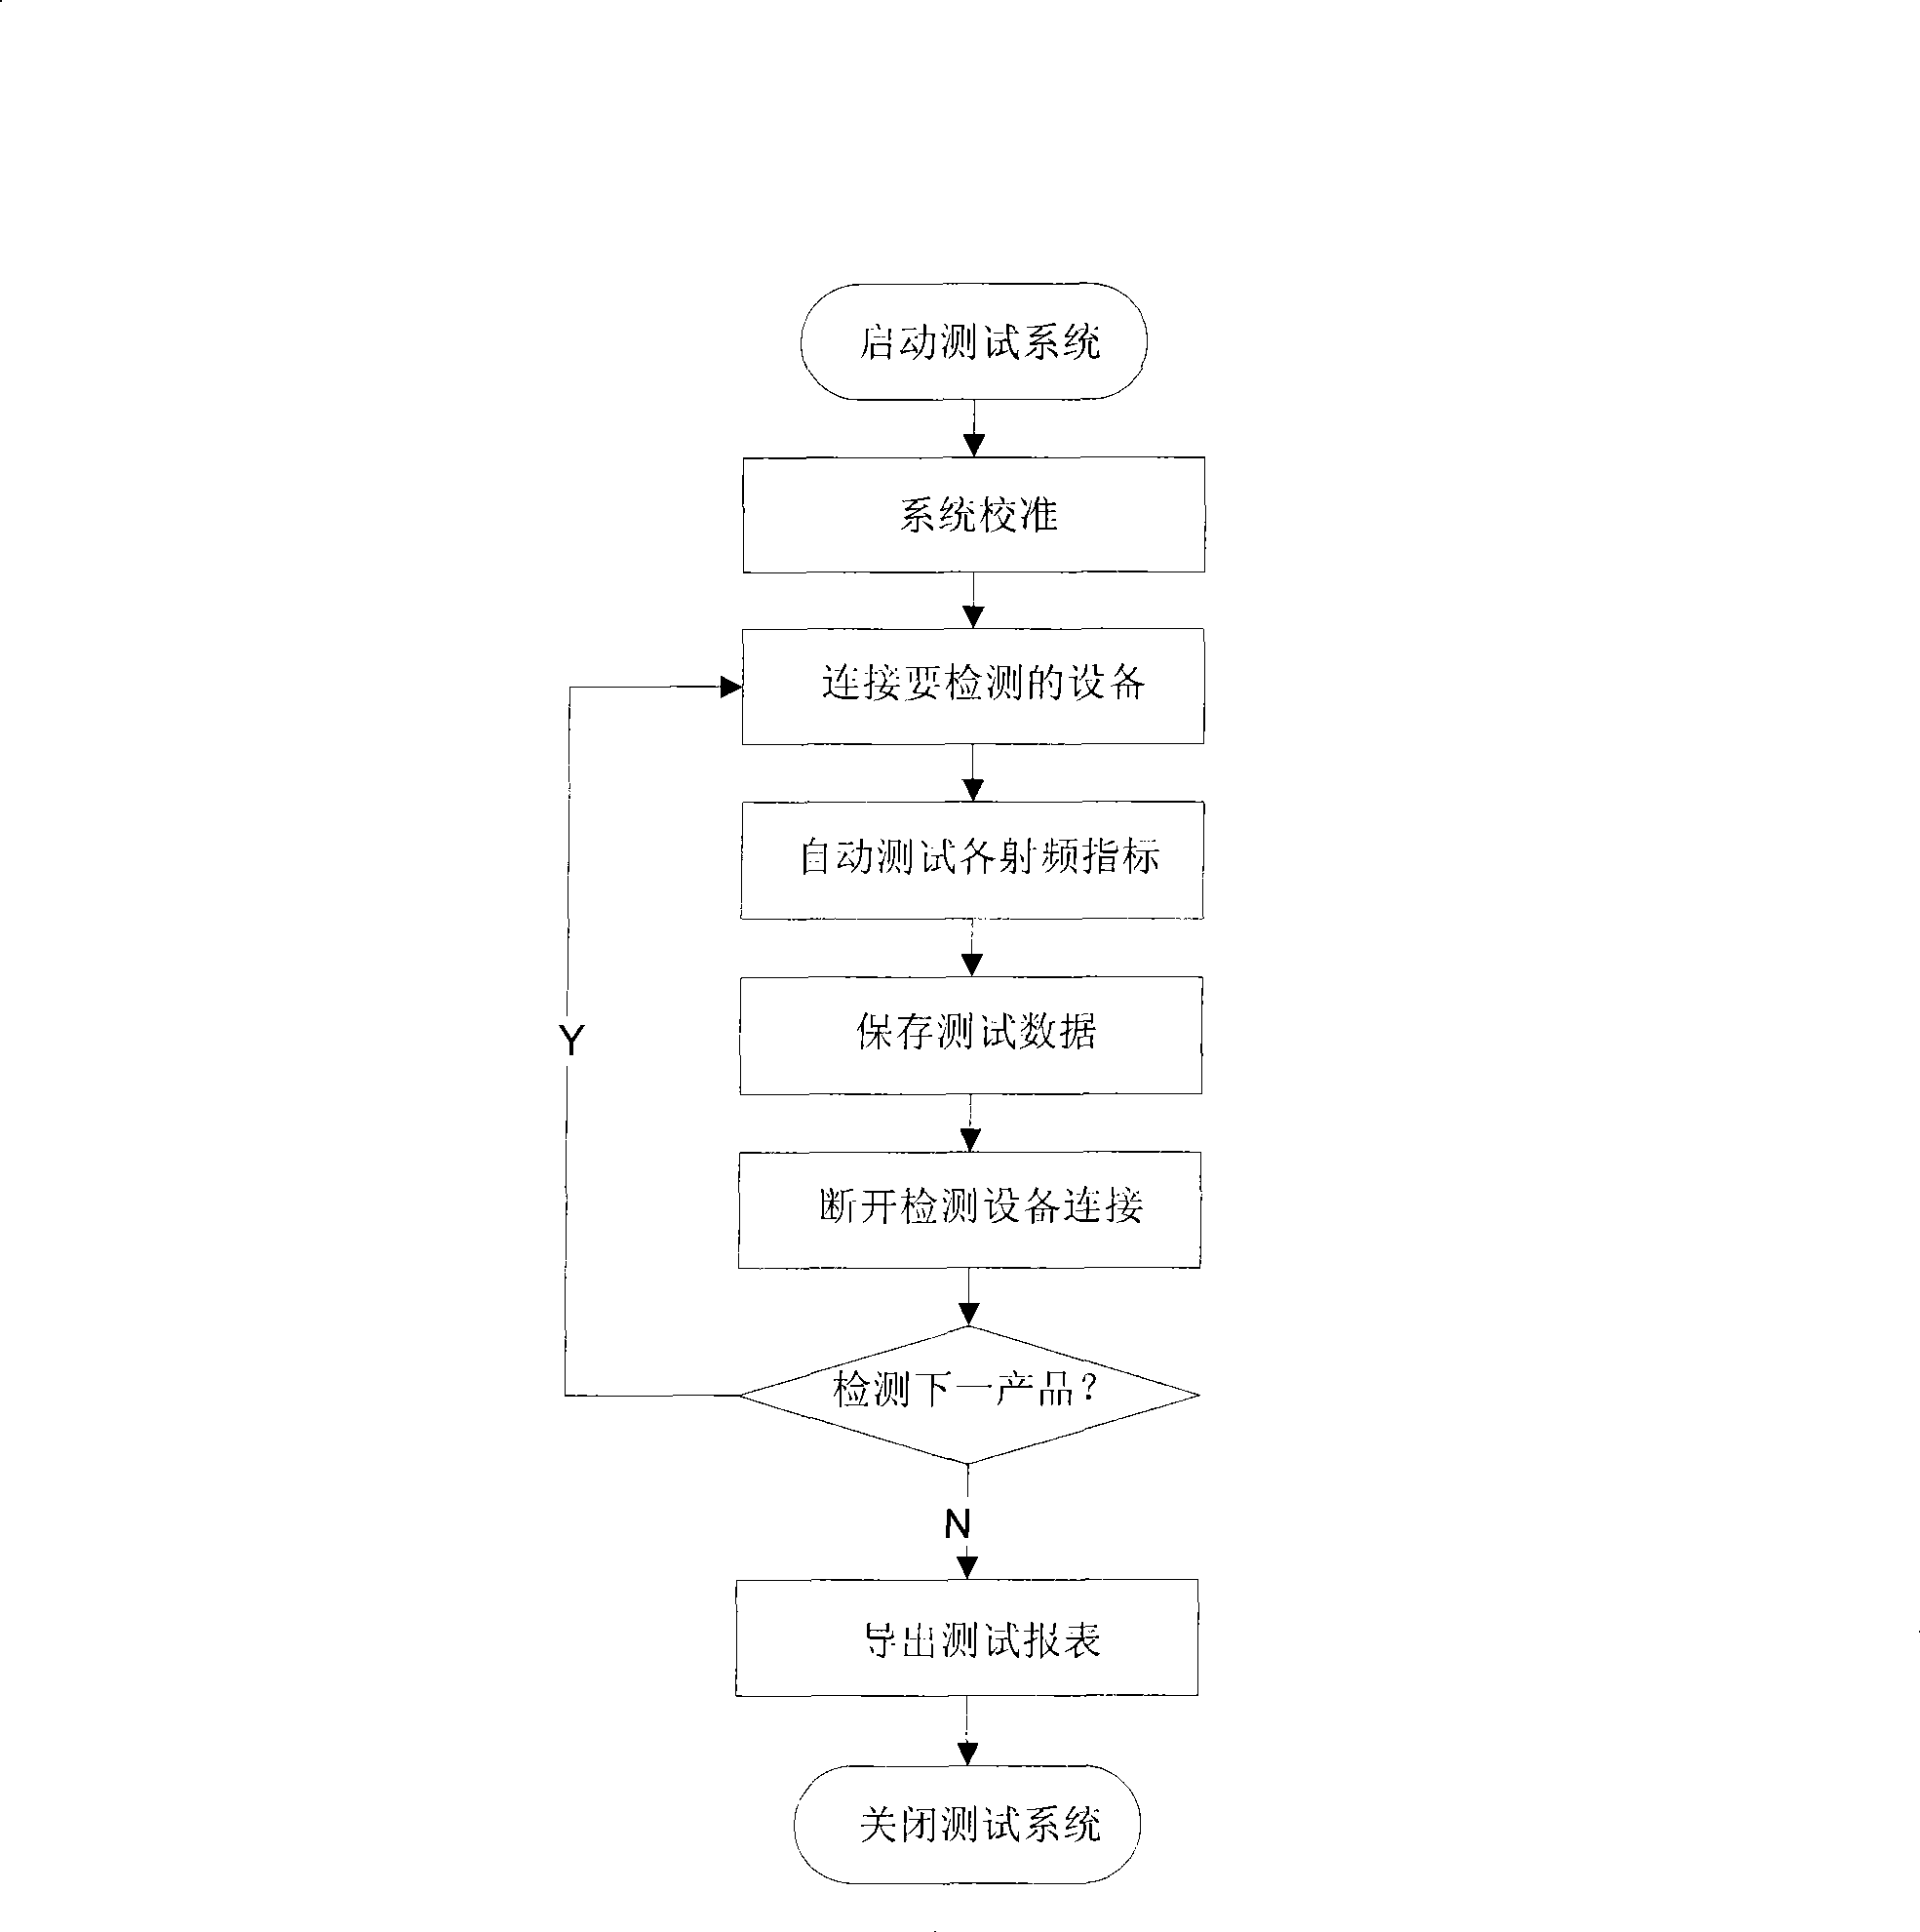 Detection system for repeater product radio frequency performance, and detection method thereof